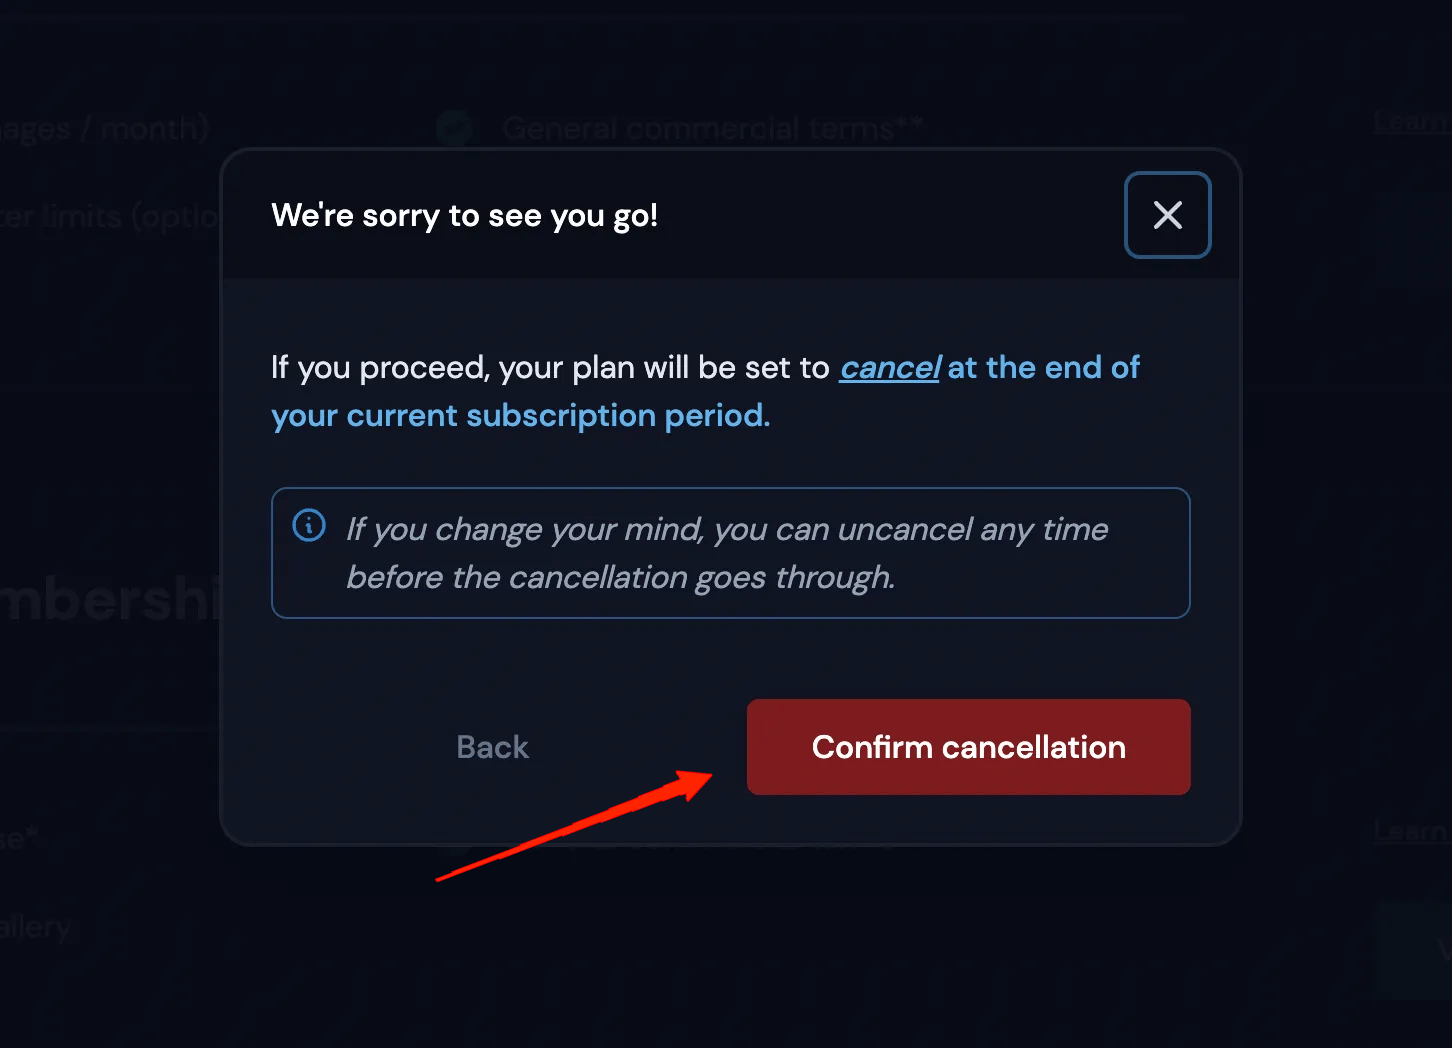 confirm your cancellation.